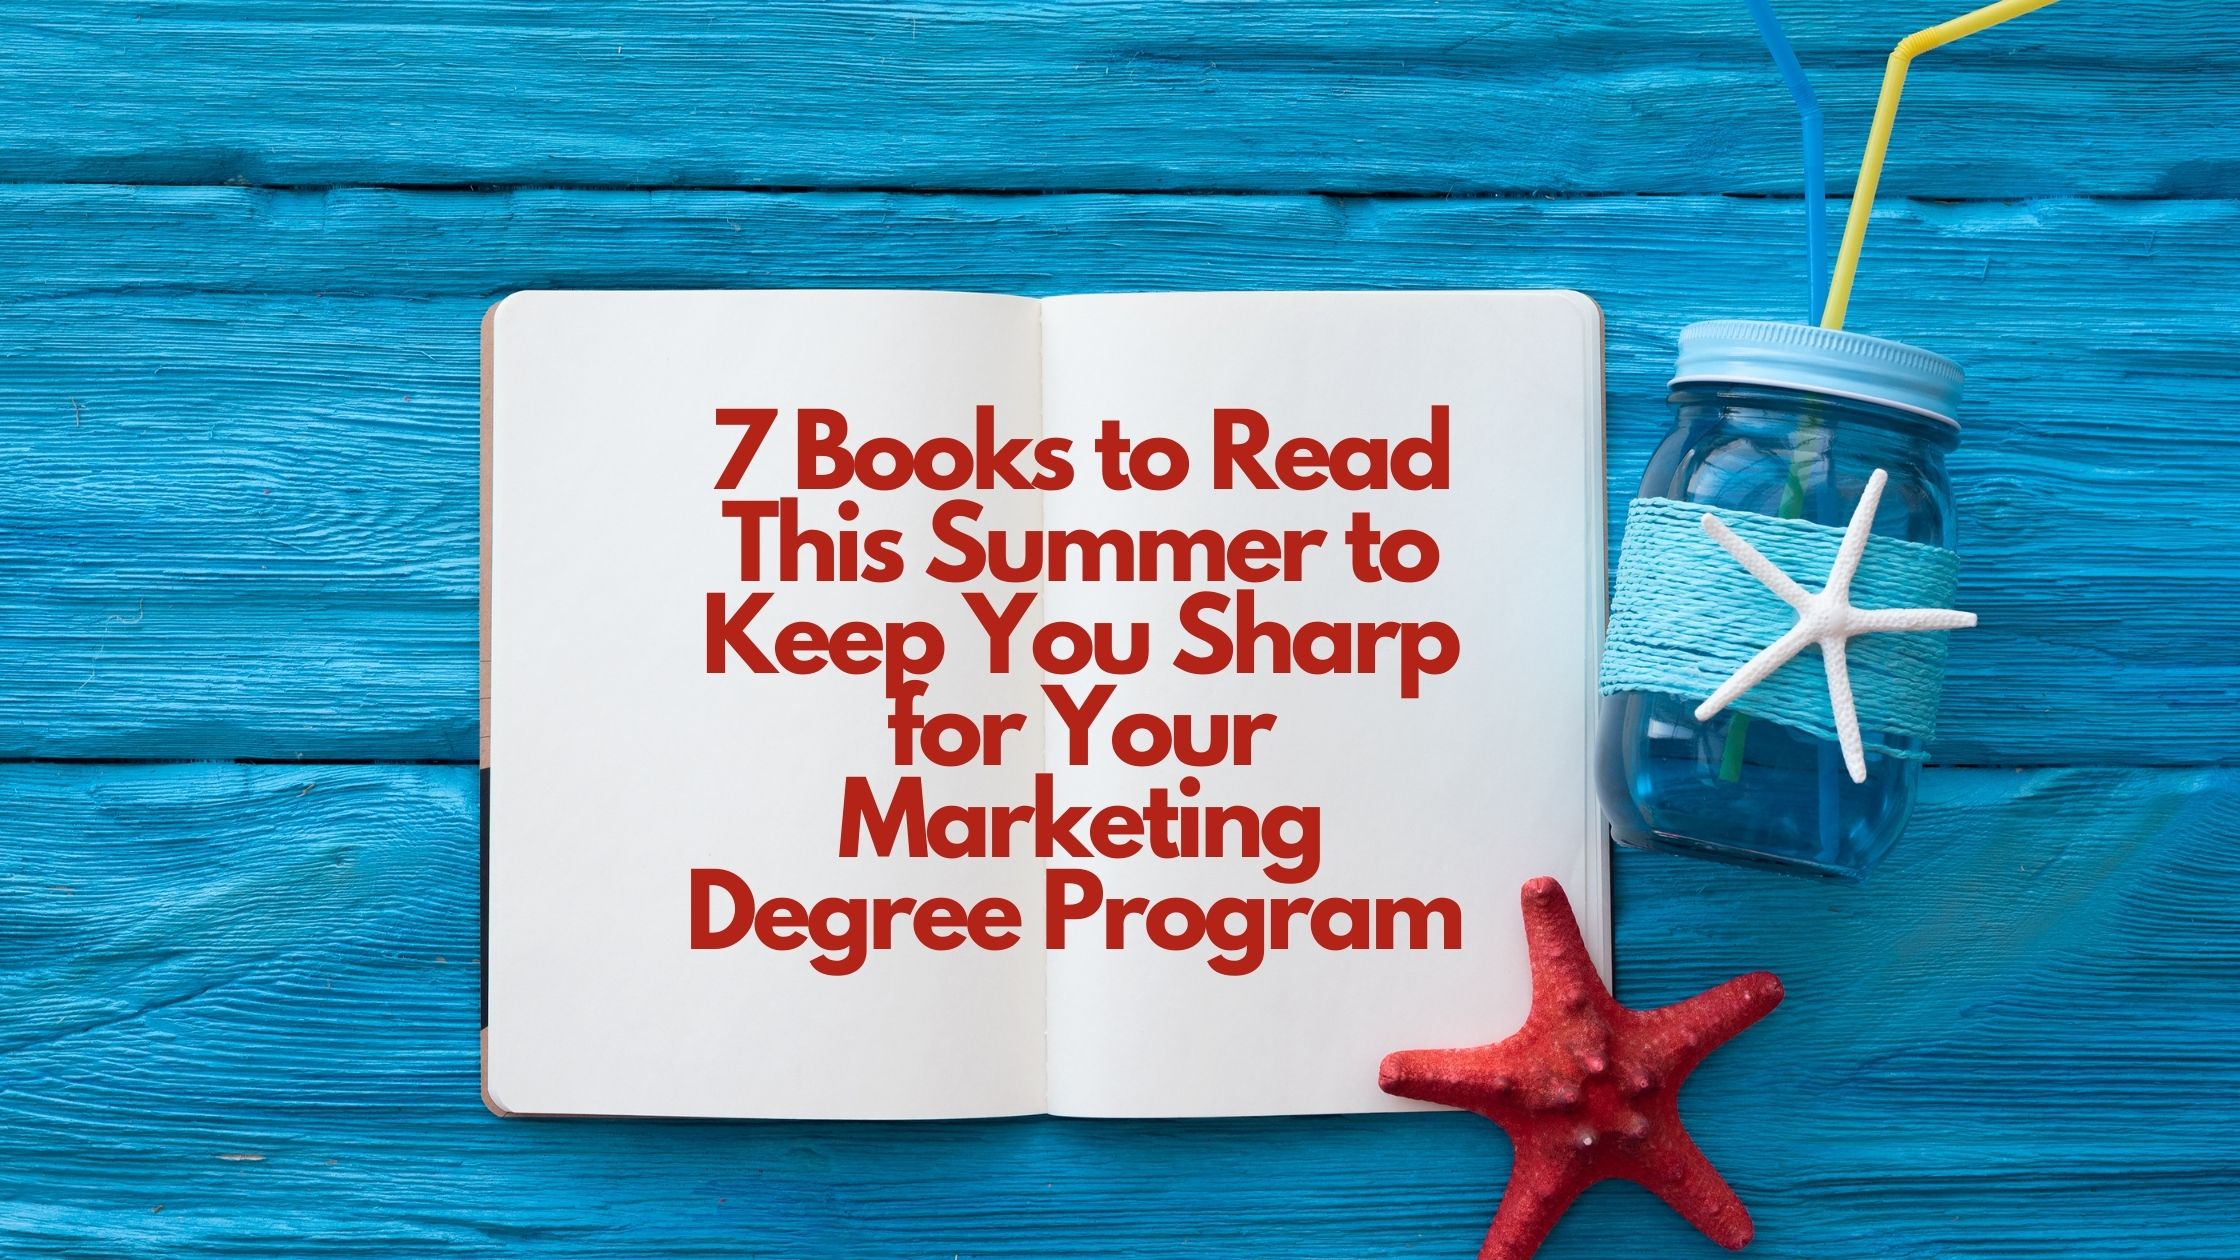 Image of 7 Intriguing Books about Marketing to Keep You Sharp This Summer  